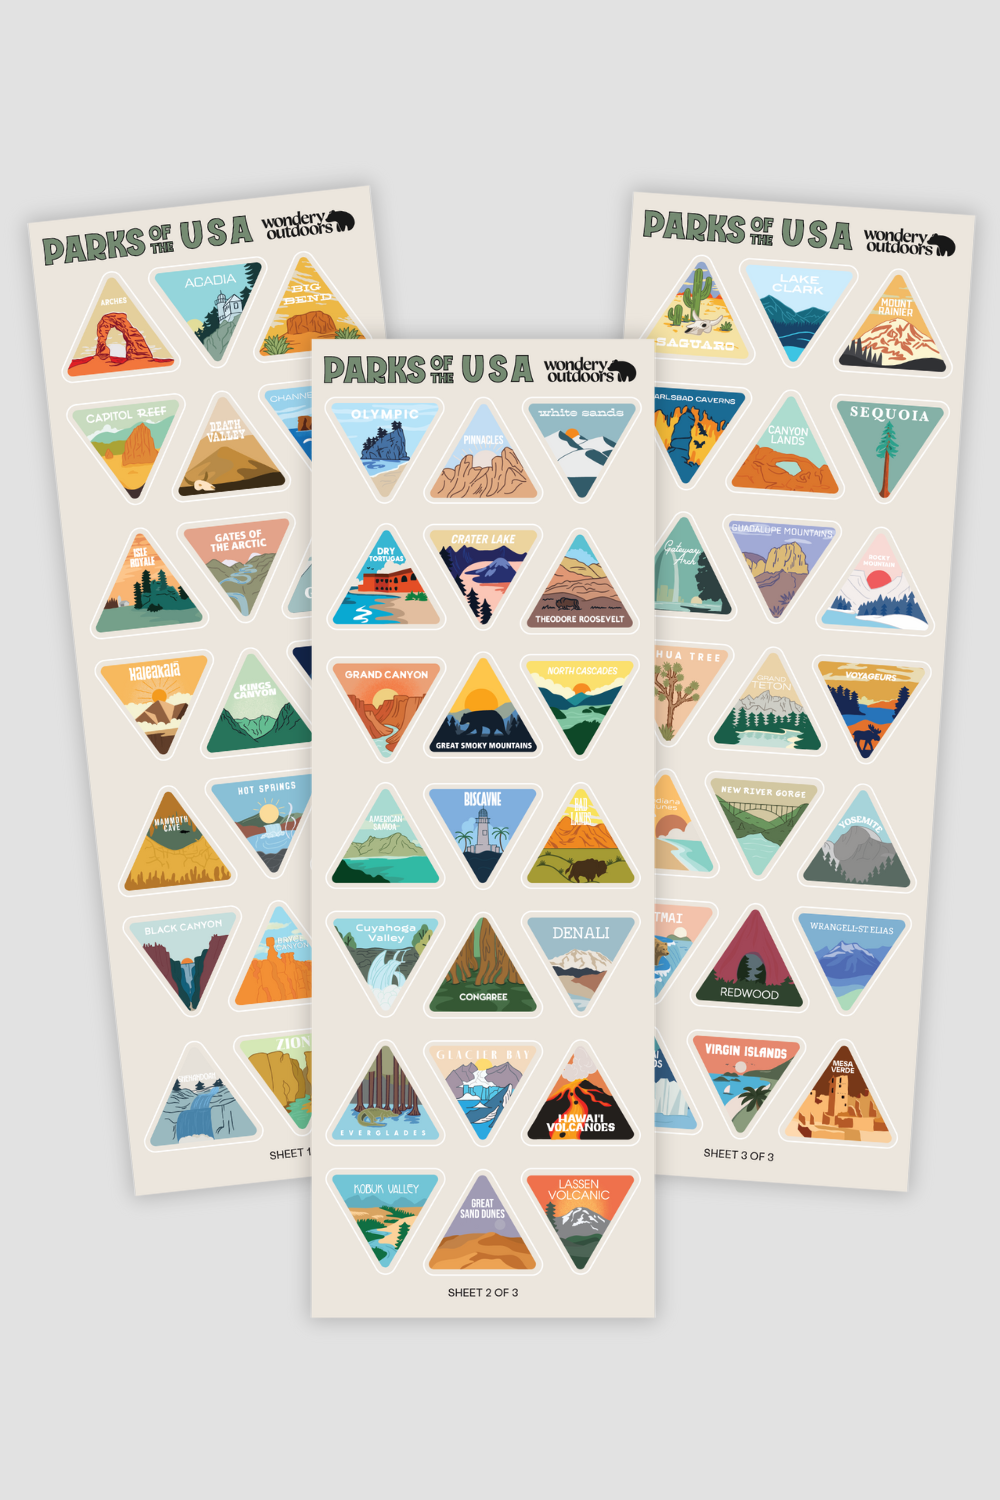 The Original Parks of the USA Bucket List Bottle (NO STICKERS)